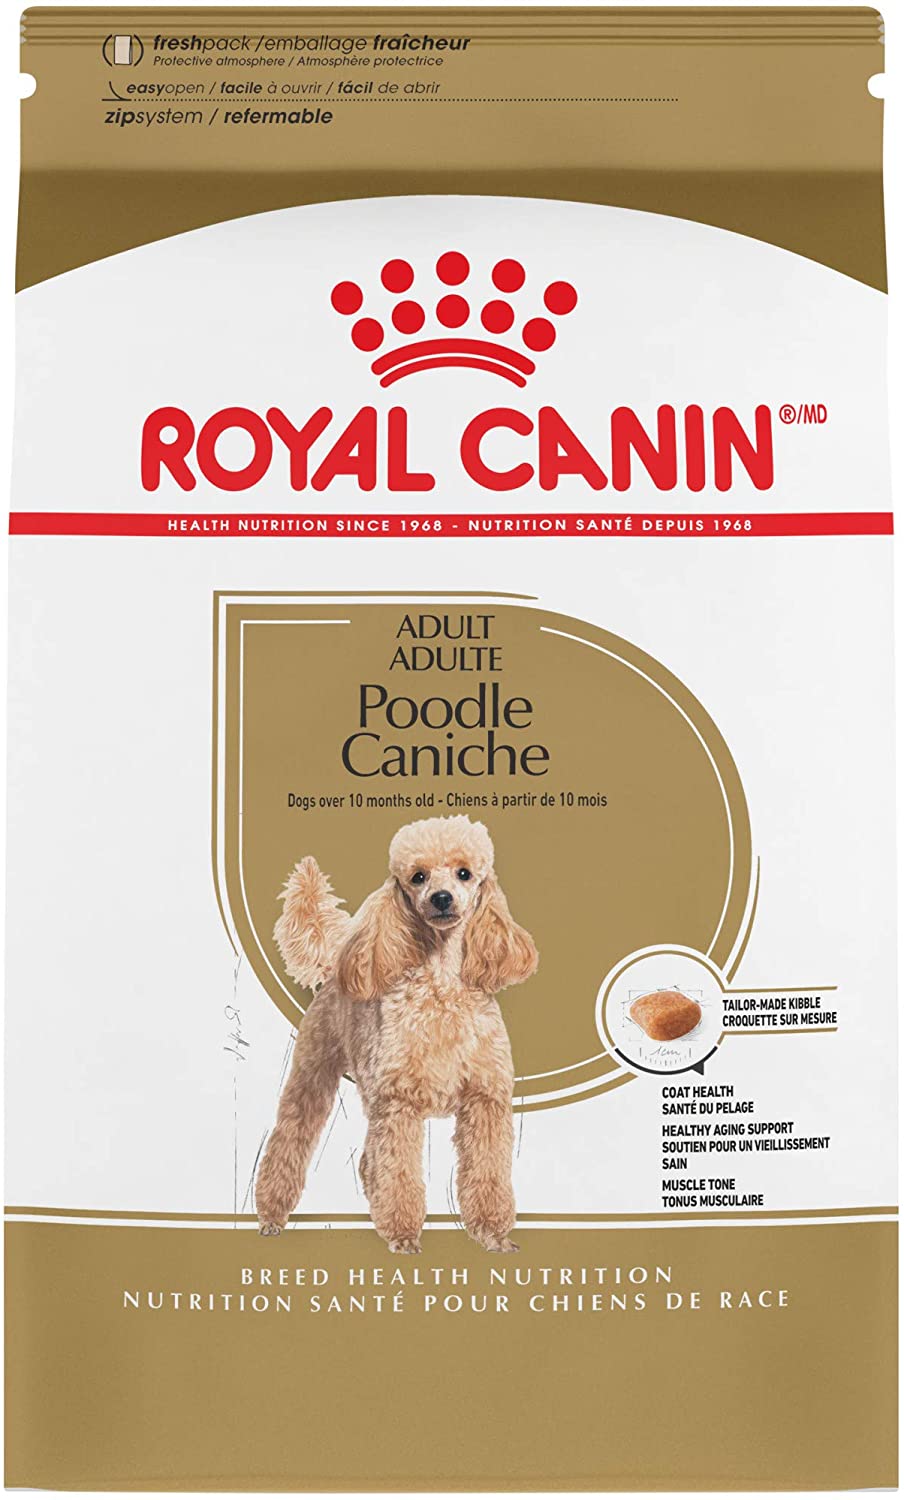 Royal Canin Poodle Caniches